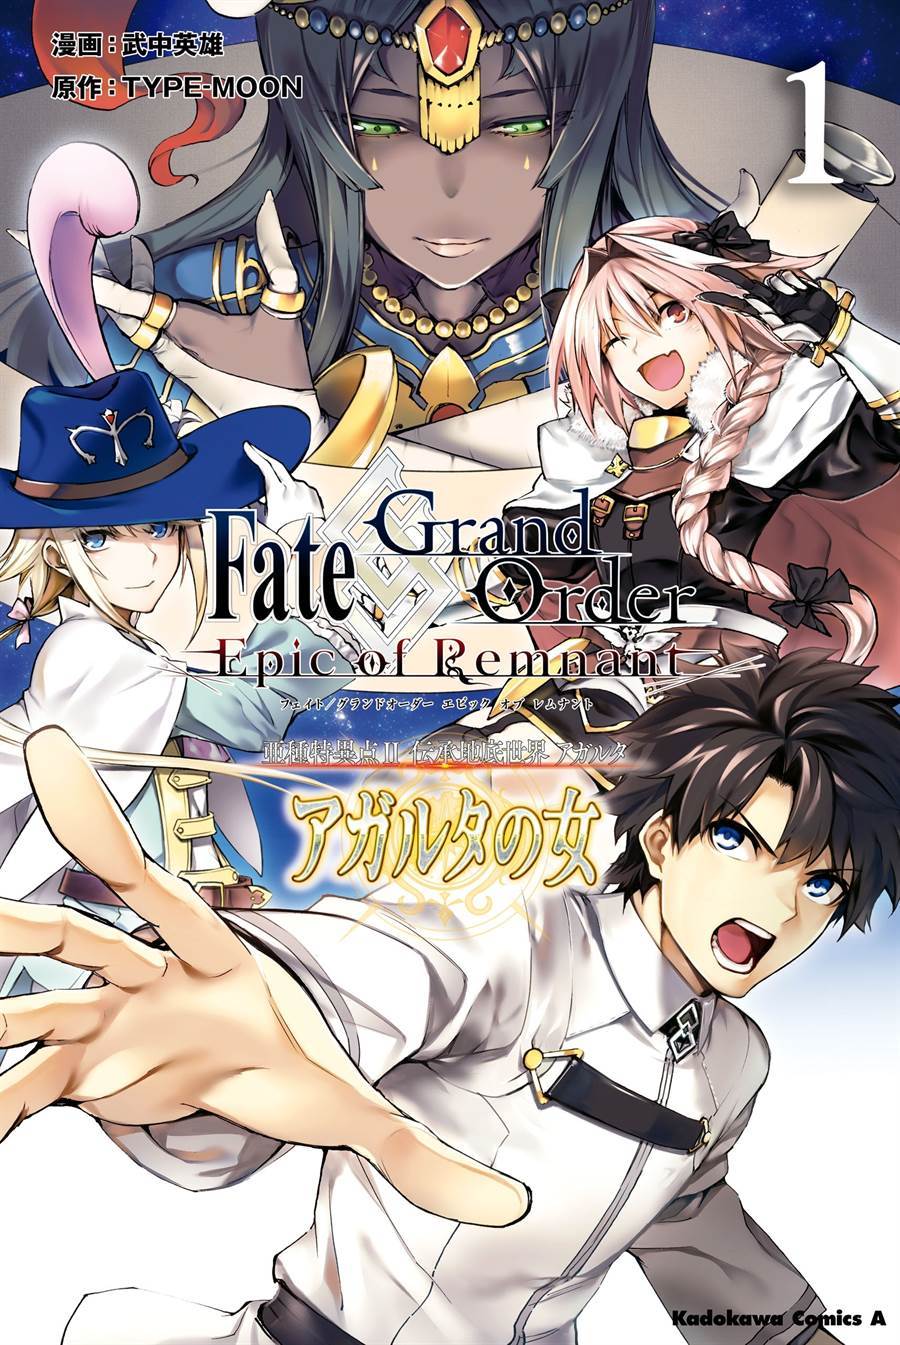 Fate/Grand Order: Epic of Remnant – The Woman of Agarth Chapter 3